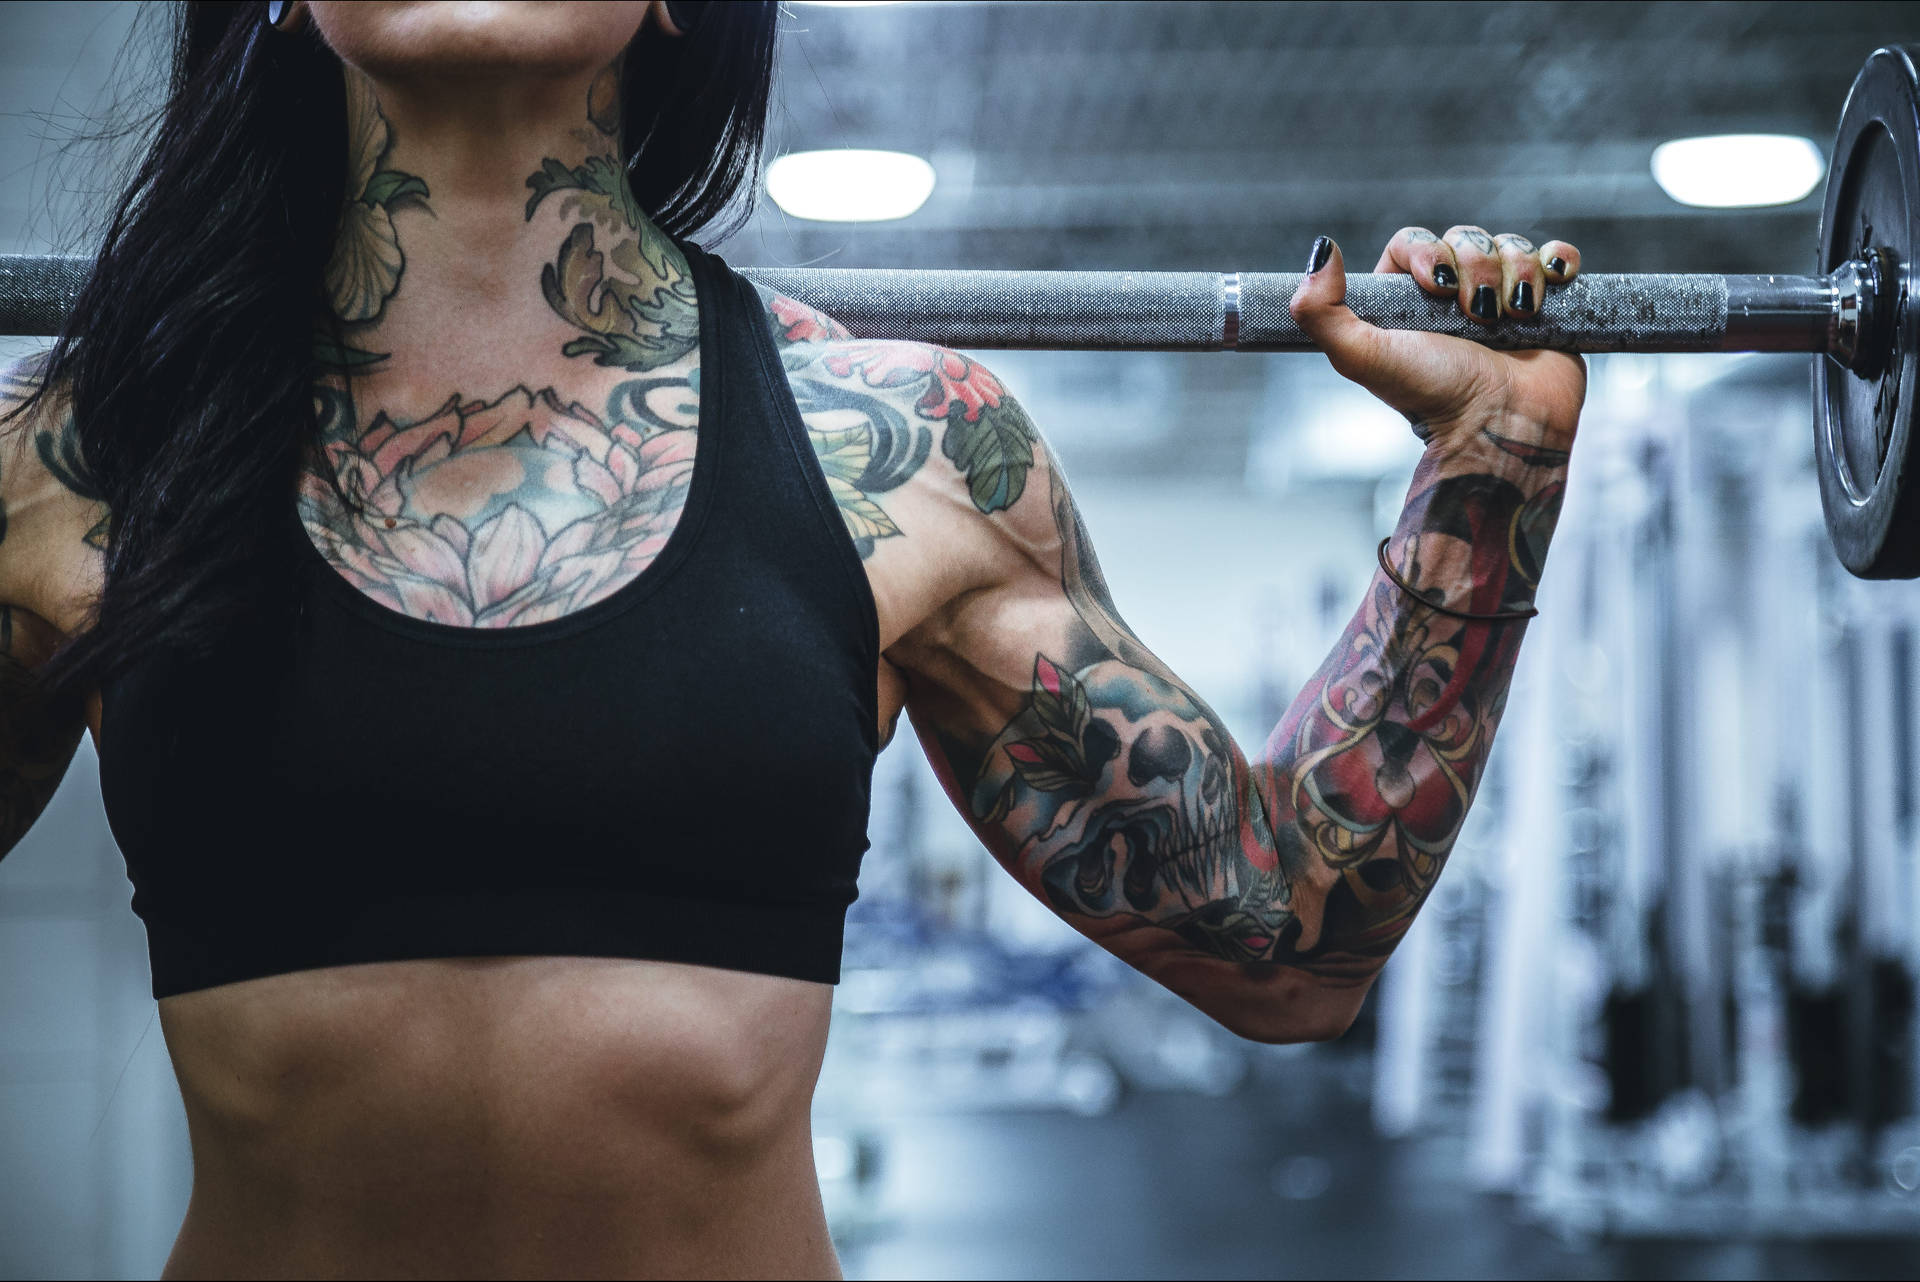 Tattooed Woman With Barbell